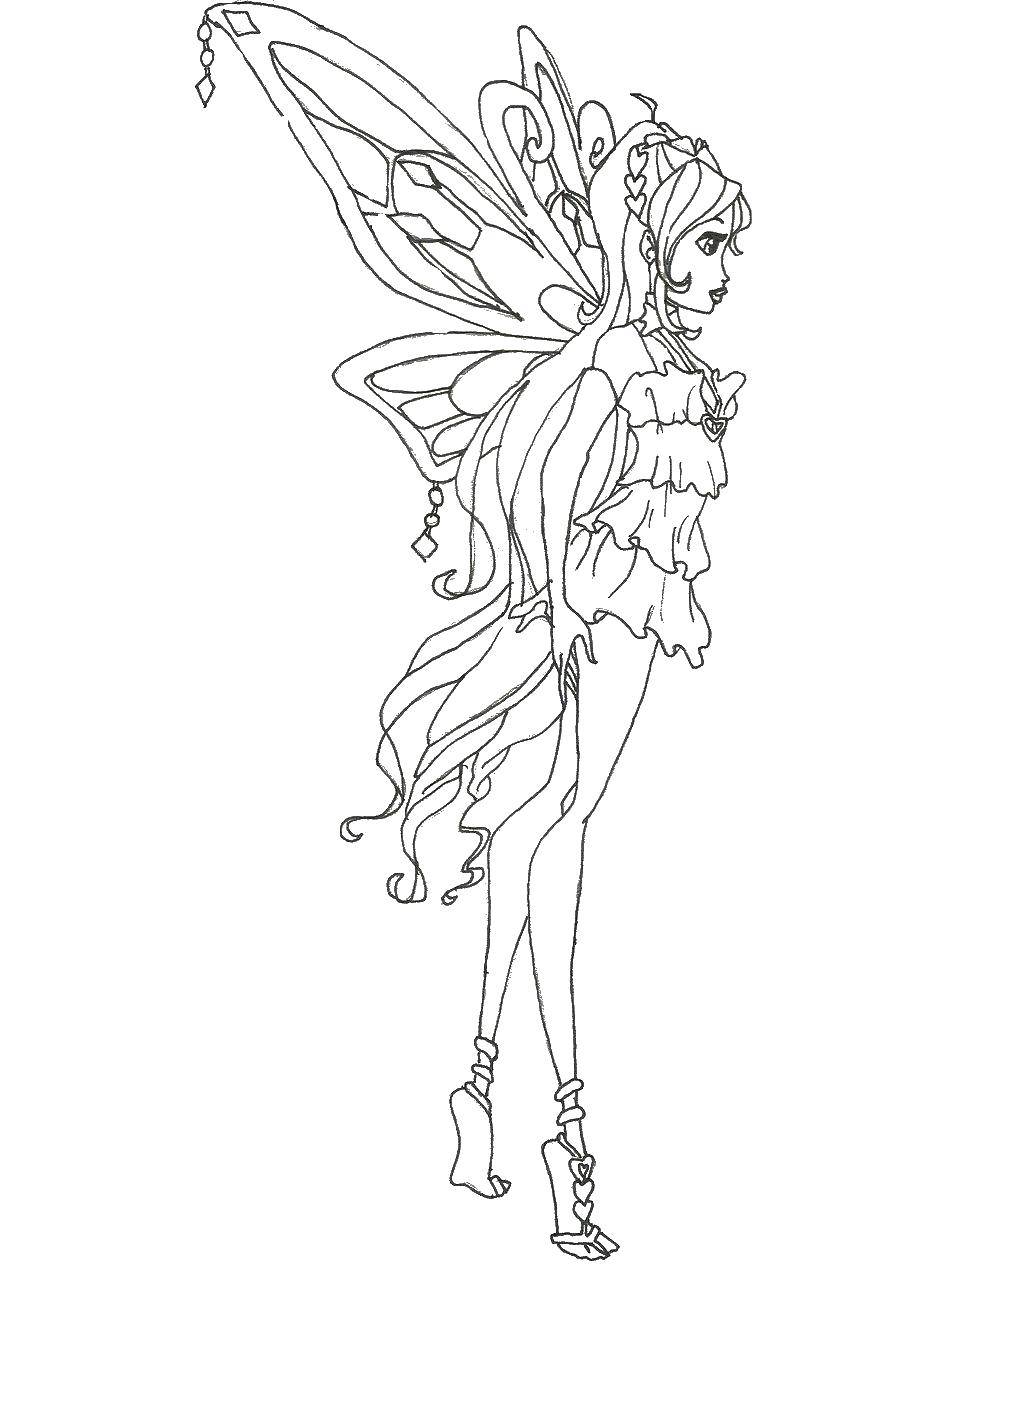 Coloring The girl with wings. Category Winx club. Tags:  girl, wings, fairy.